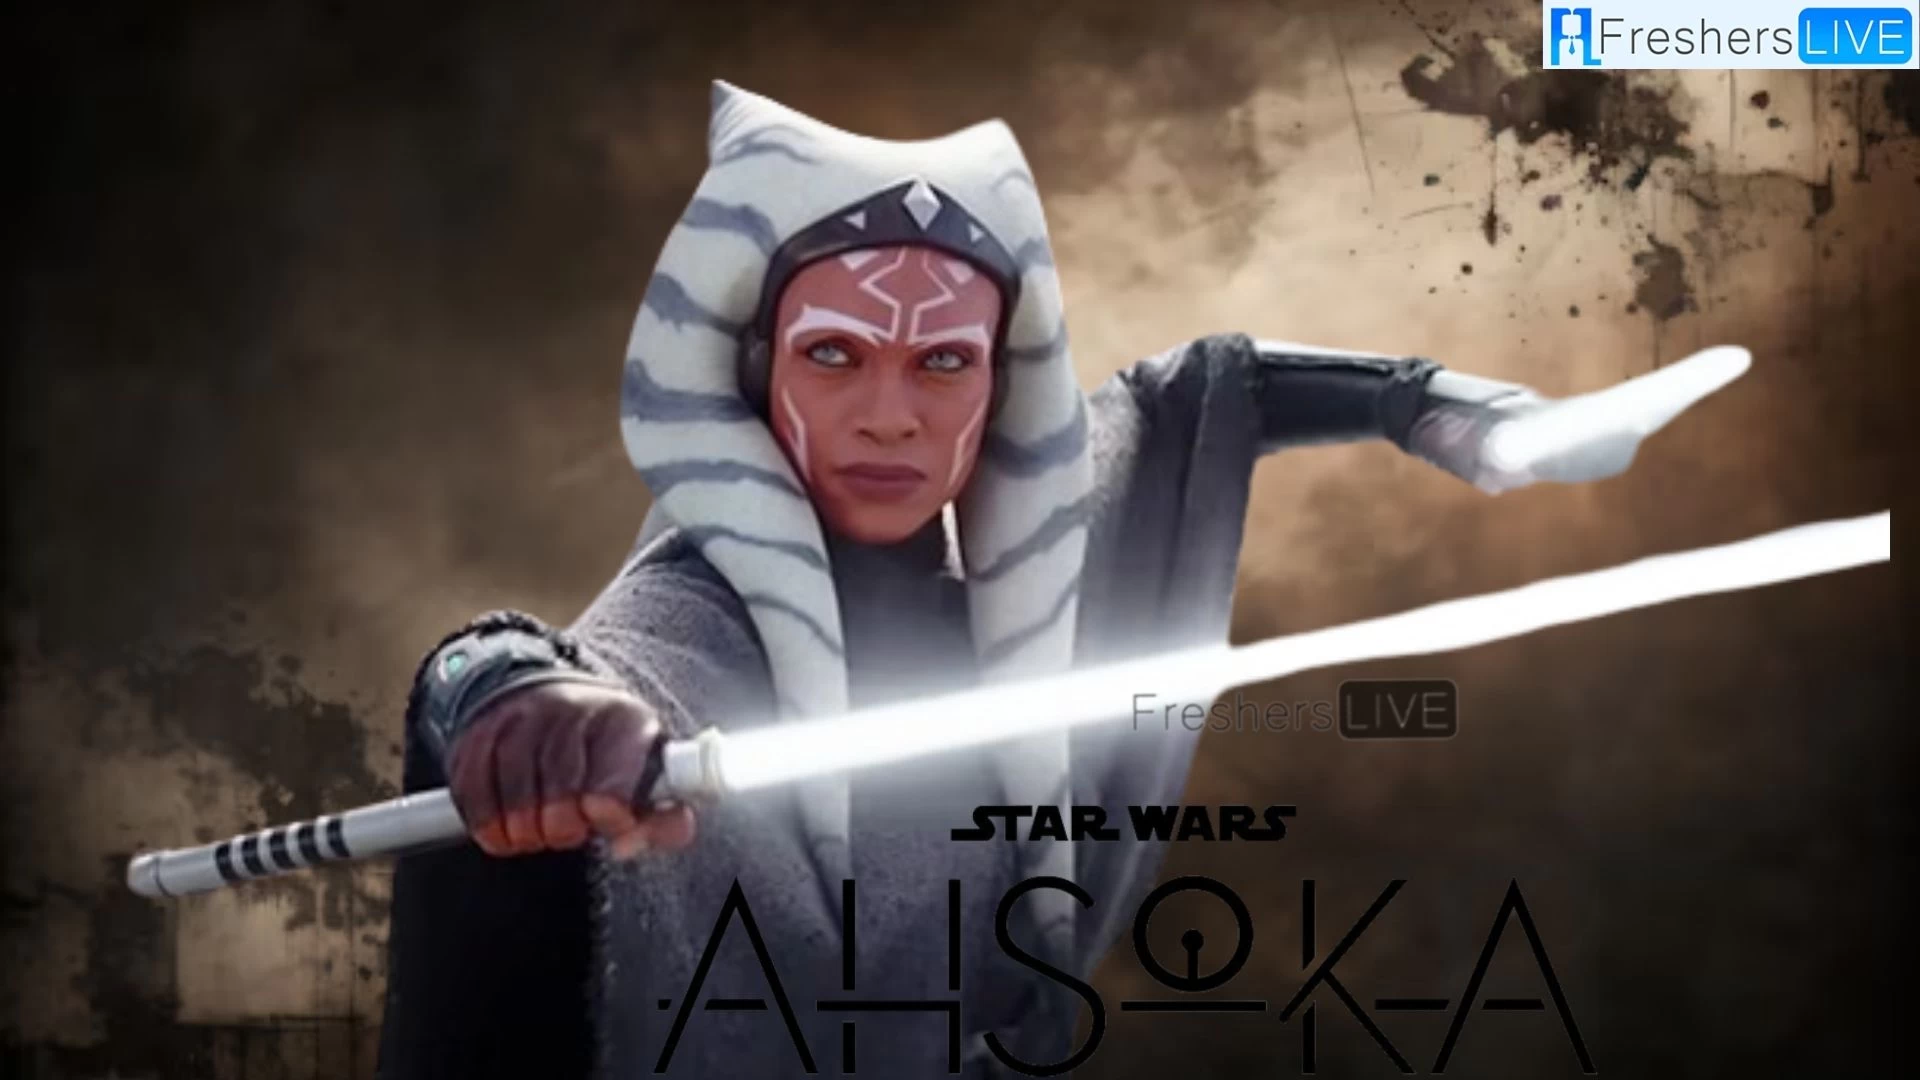 Ahsoka Season 1 Episode 8 Ending Explained, Release Date, Cast, Review, Plot, Where to Watch and More